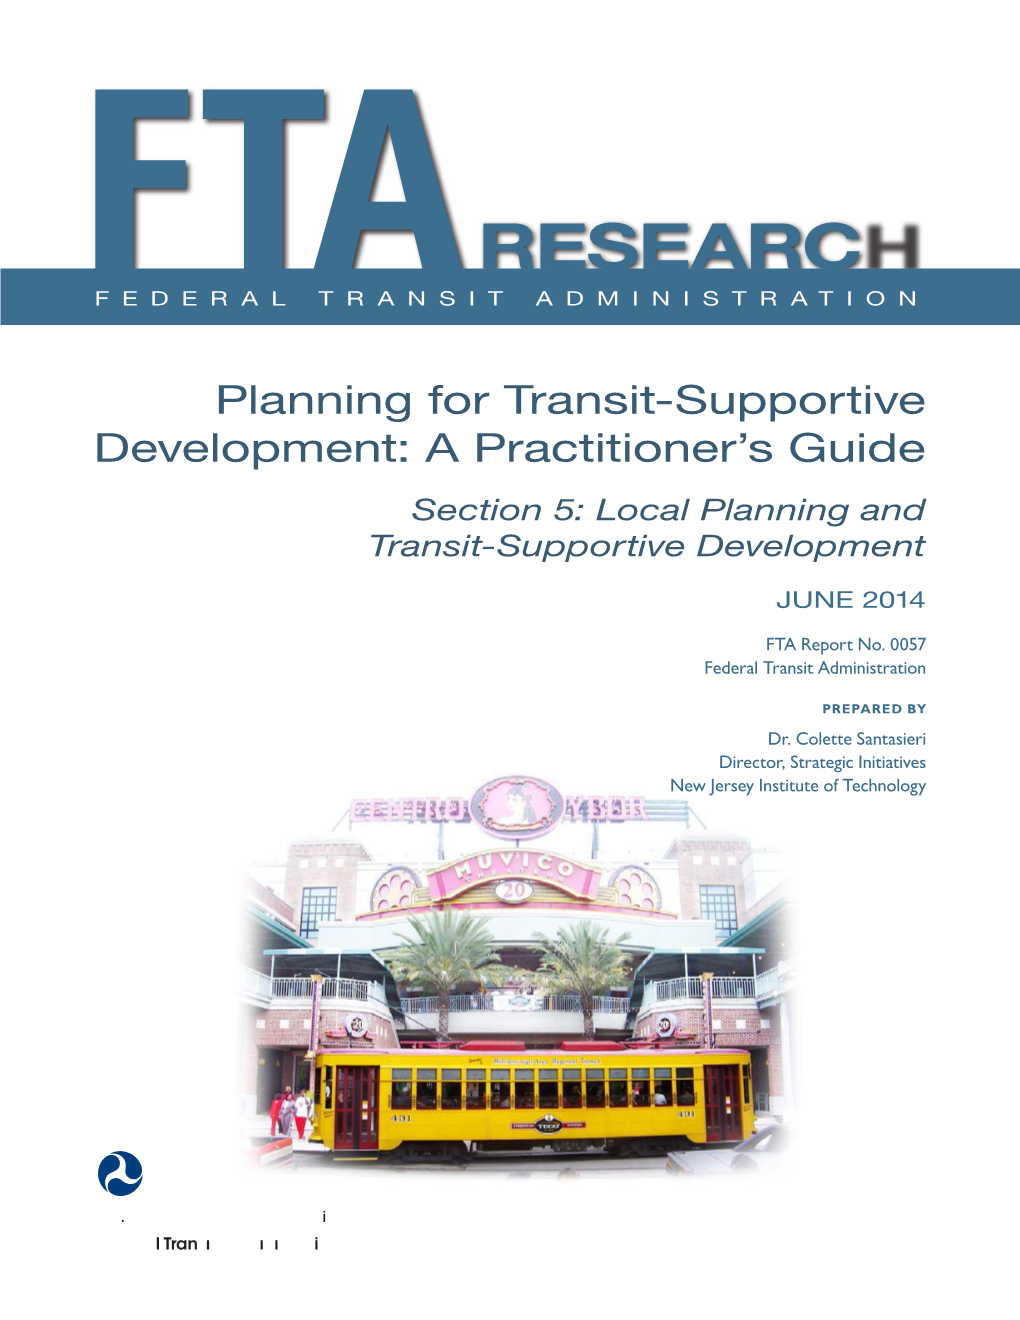 Planning for Transit-Supportive Development: a Practitioner’S Guide Section 5: Local Planning and Transit-Supportive Development